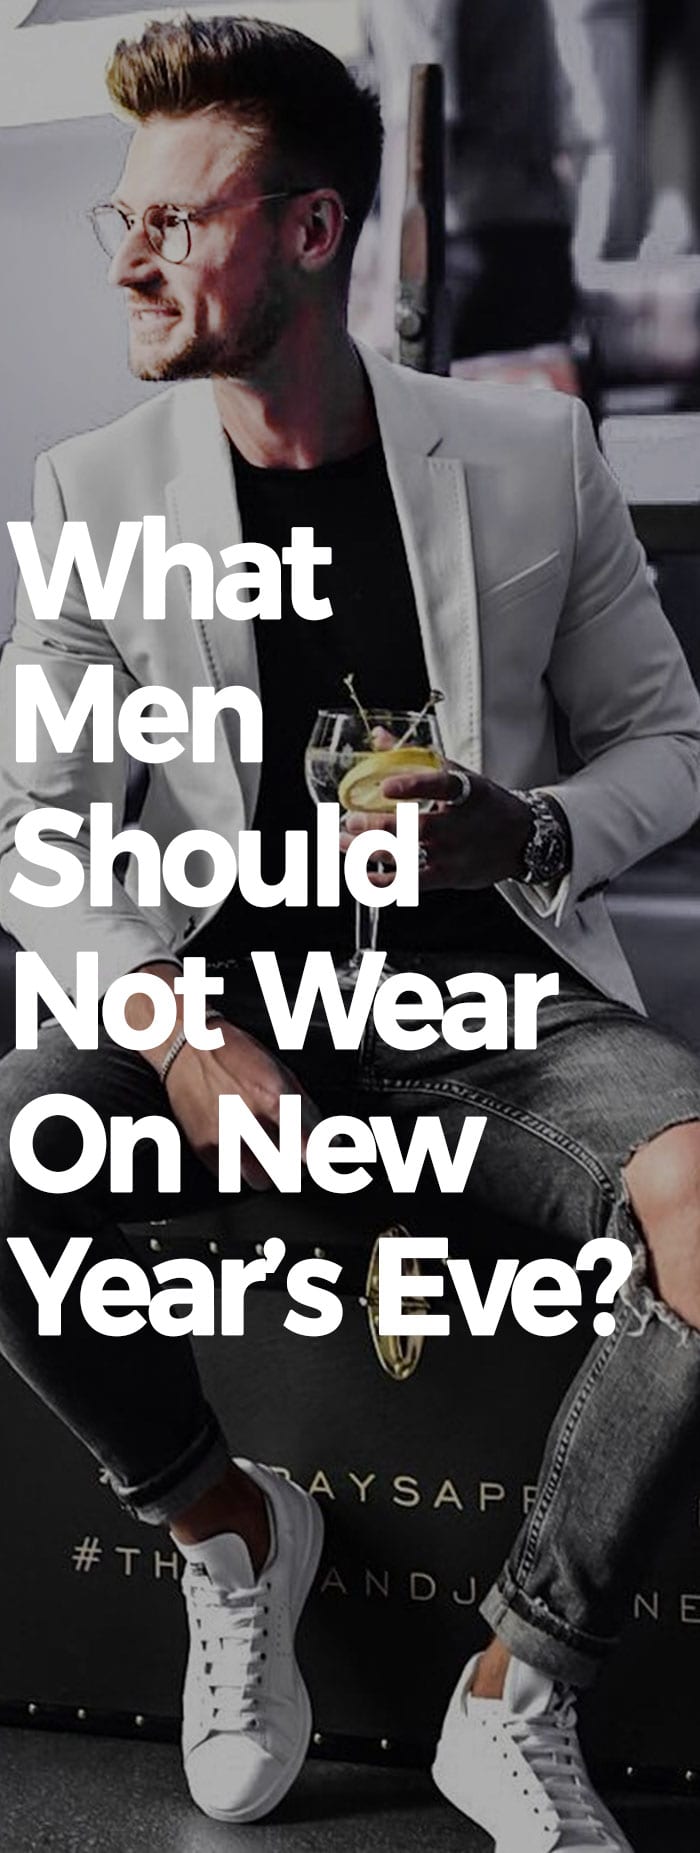 What Men Should Not Wear On New Years Eve.